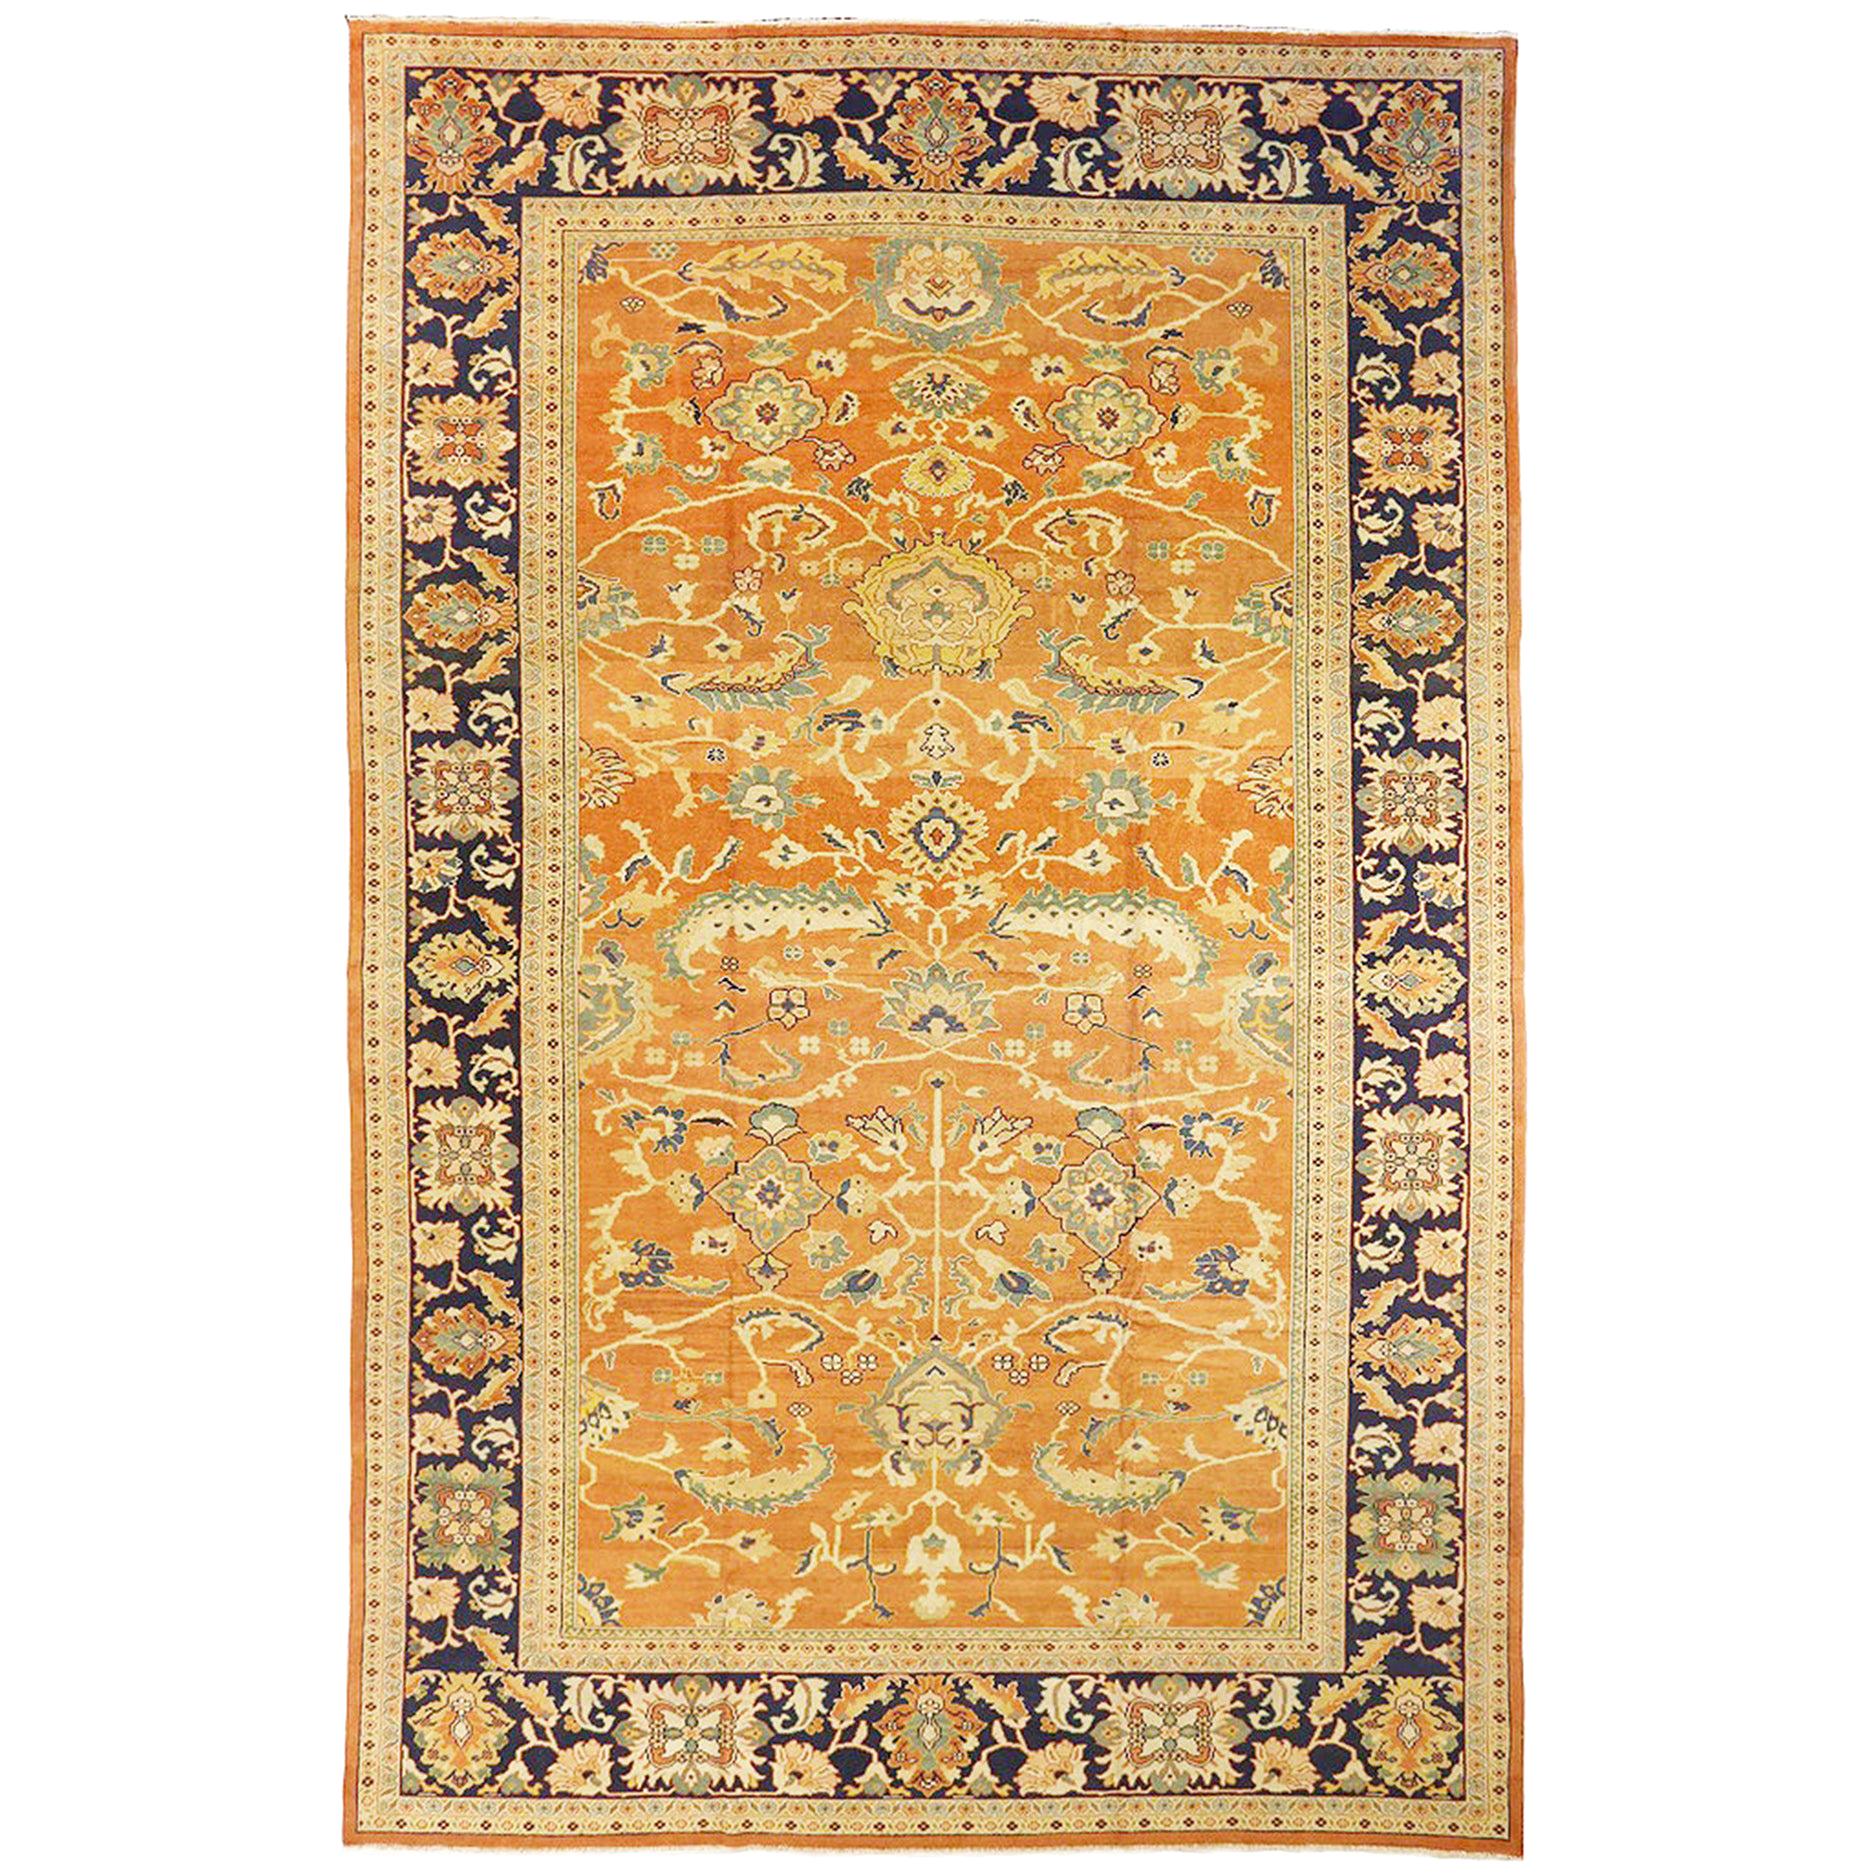 Contemporary Persian Sultanabad Rug with Floral Motif on Orange and Navy Field